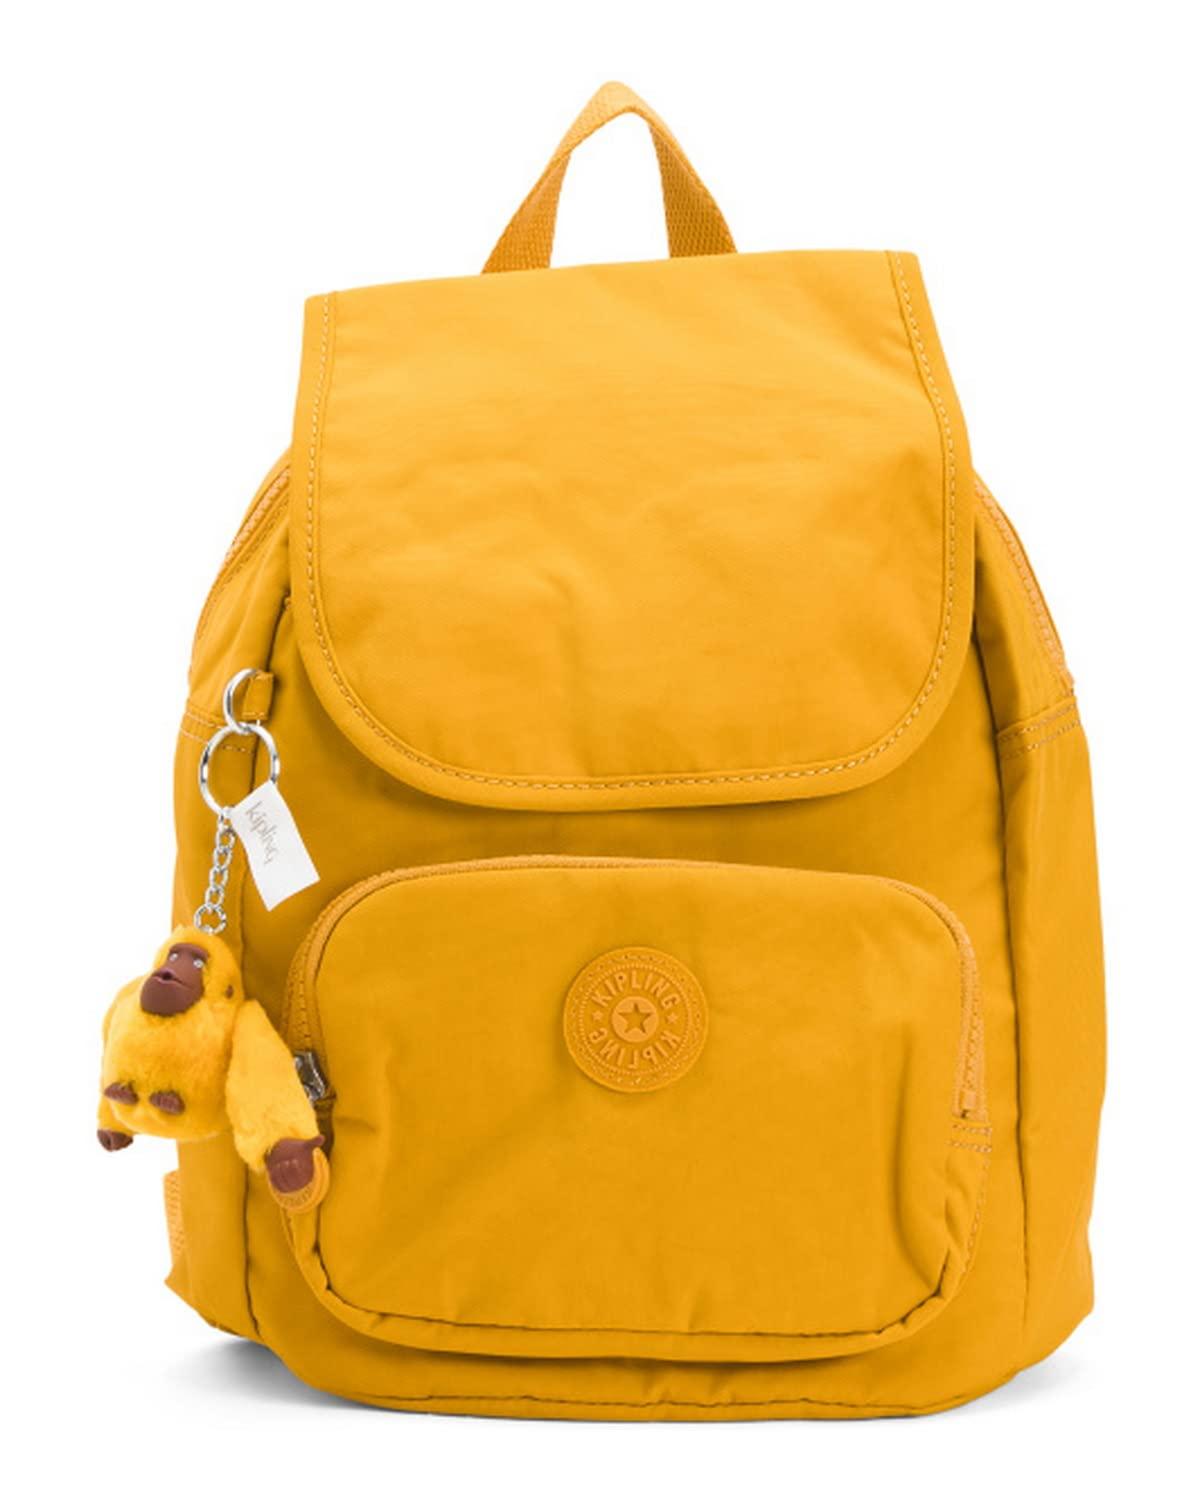 Kipling Marigold Small Backpack in Yellow | Lyst